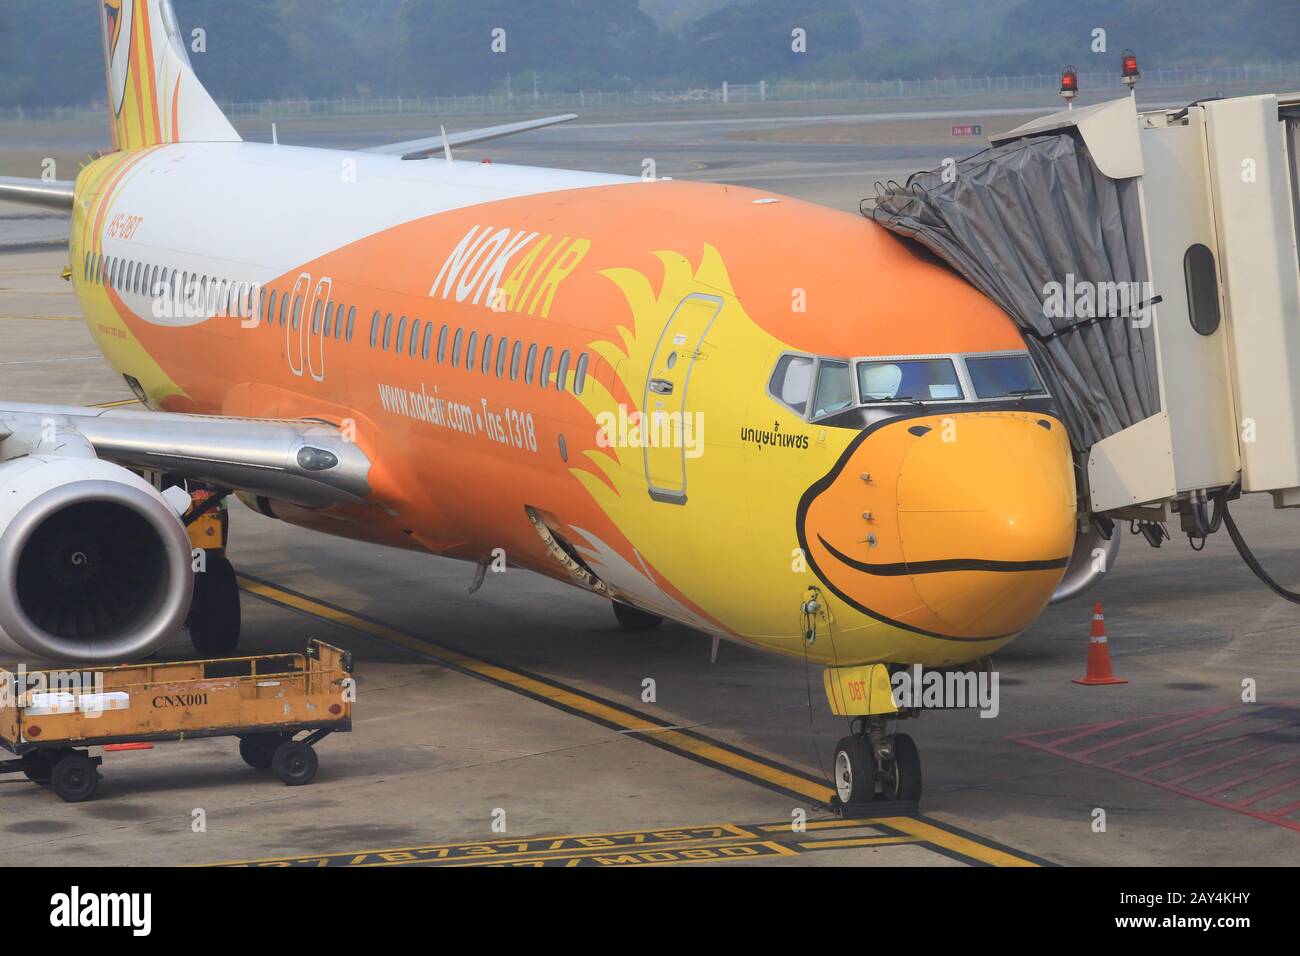 Nok Air s a low-cost airline in Thailand operating mostly domestic services Stock Photo